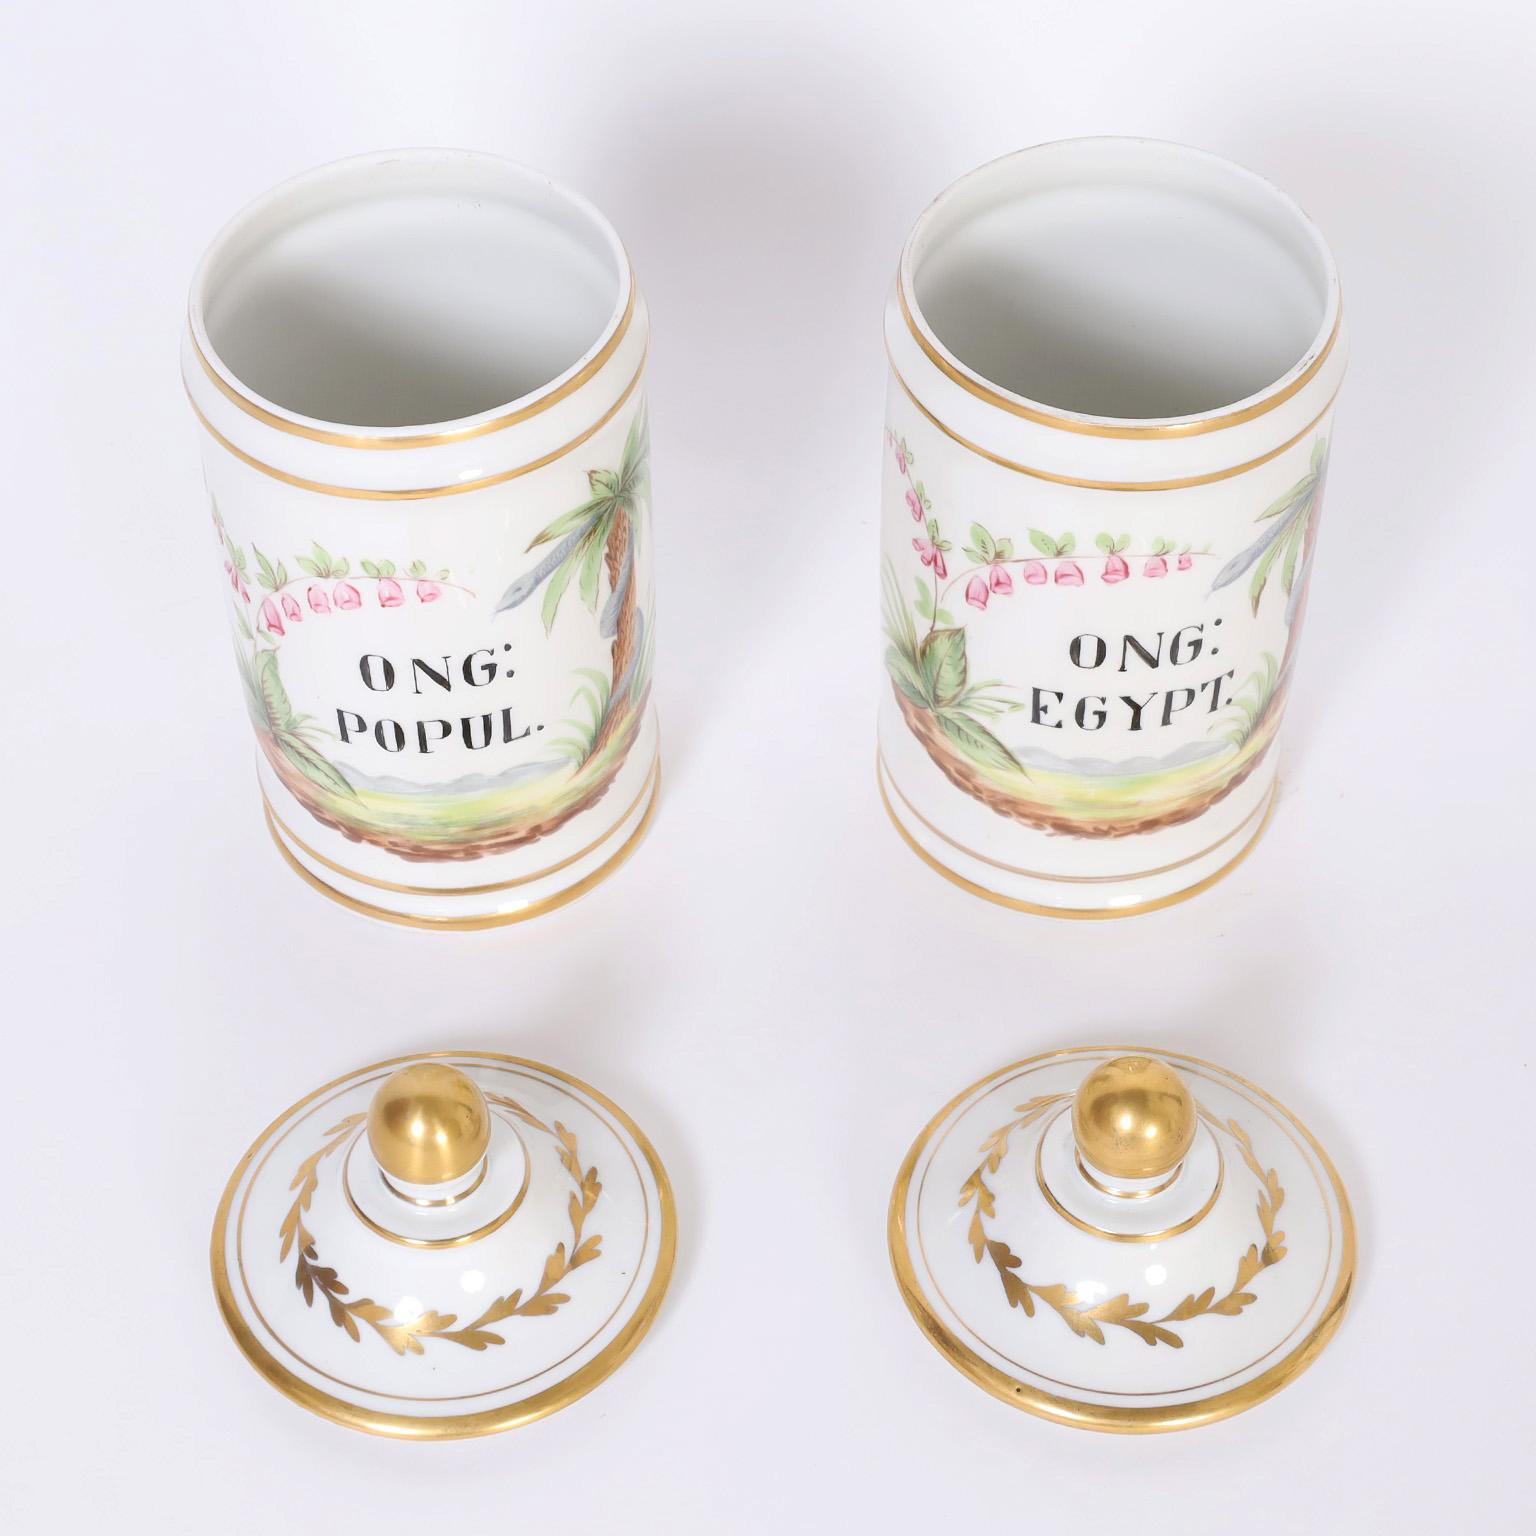 Pair of antique apothecary jars labeled in latin and hand decorated with tropical scenes with flowers.